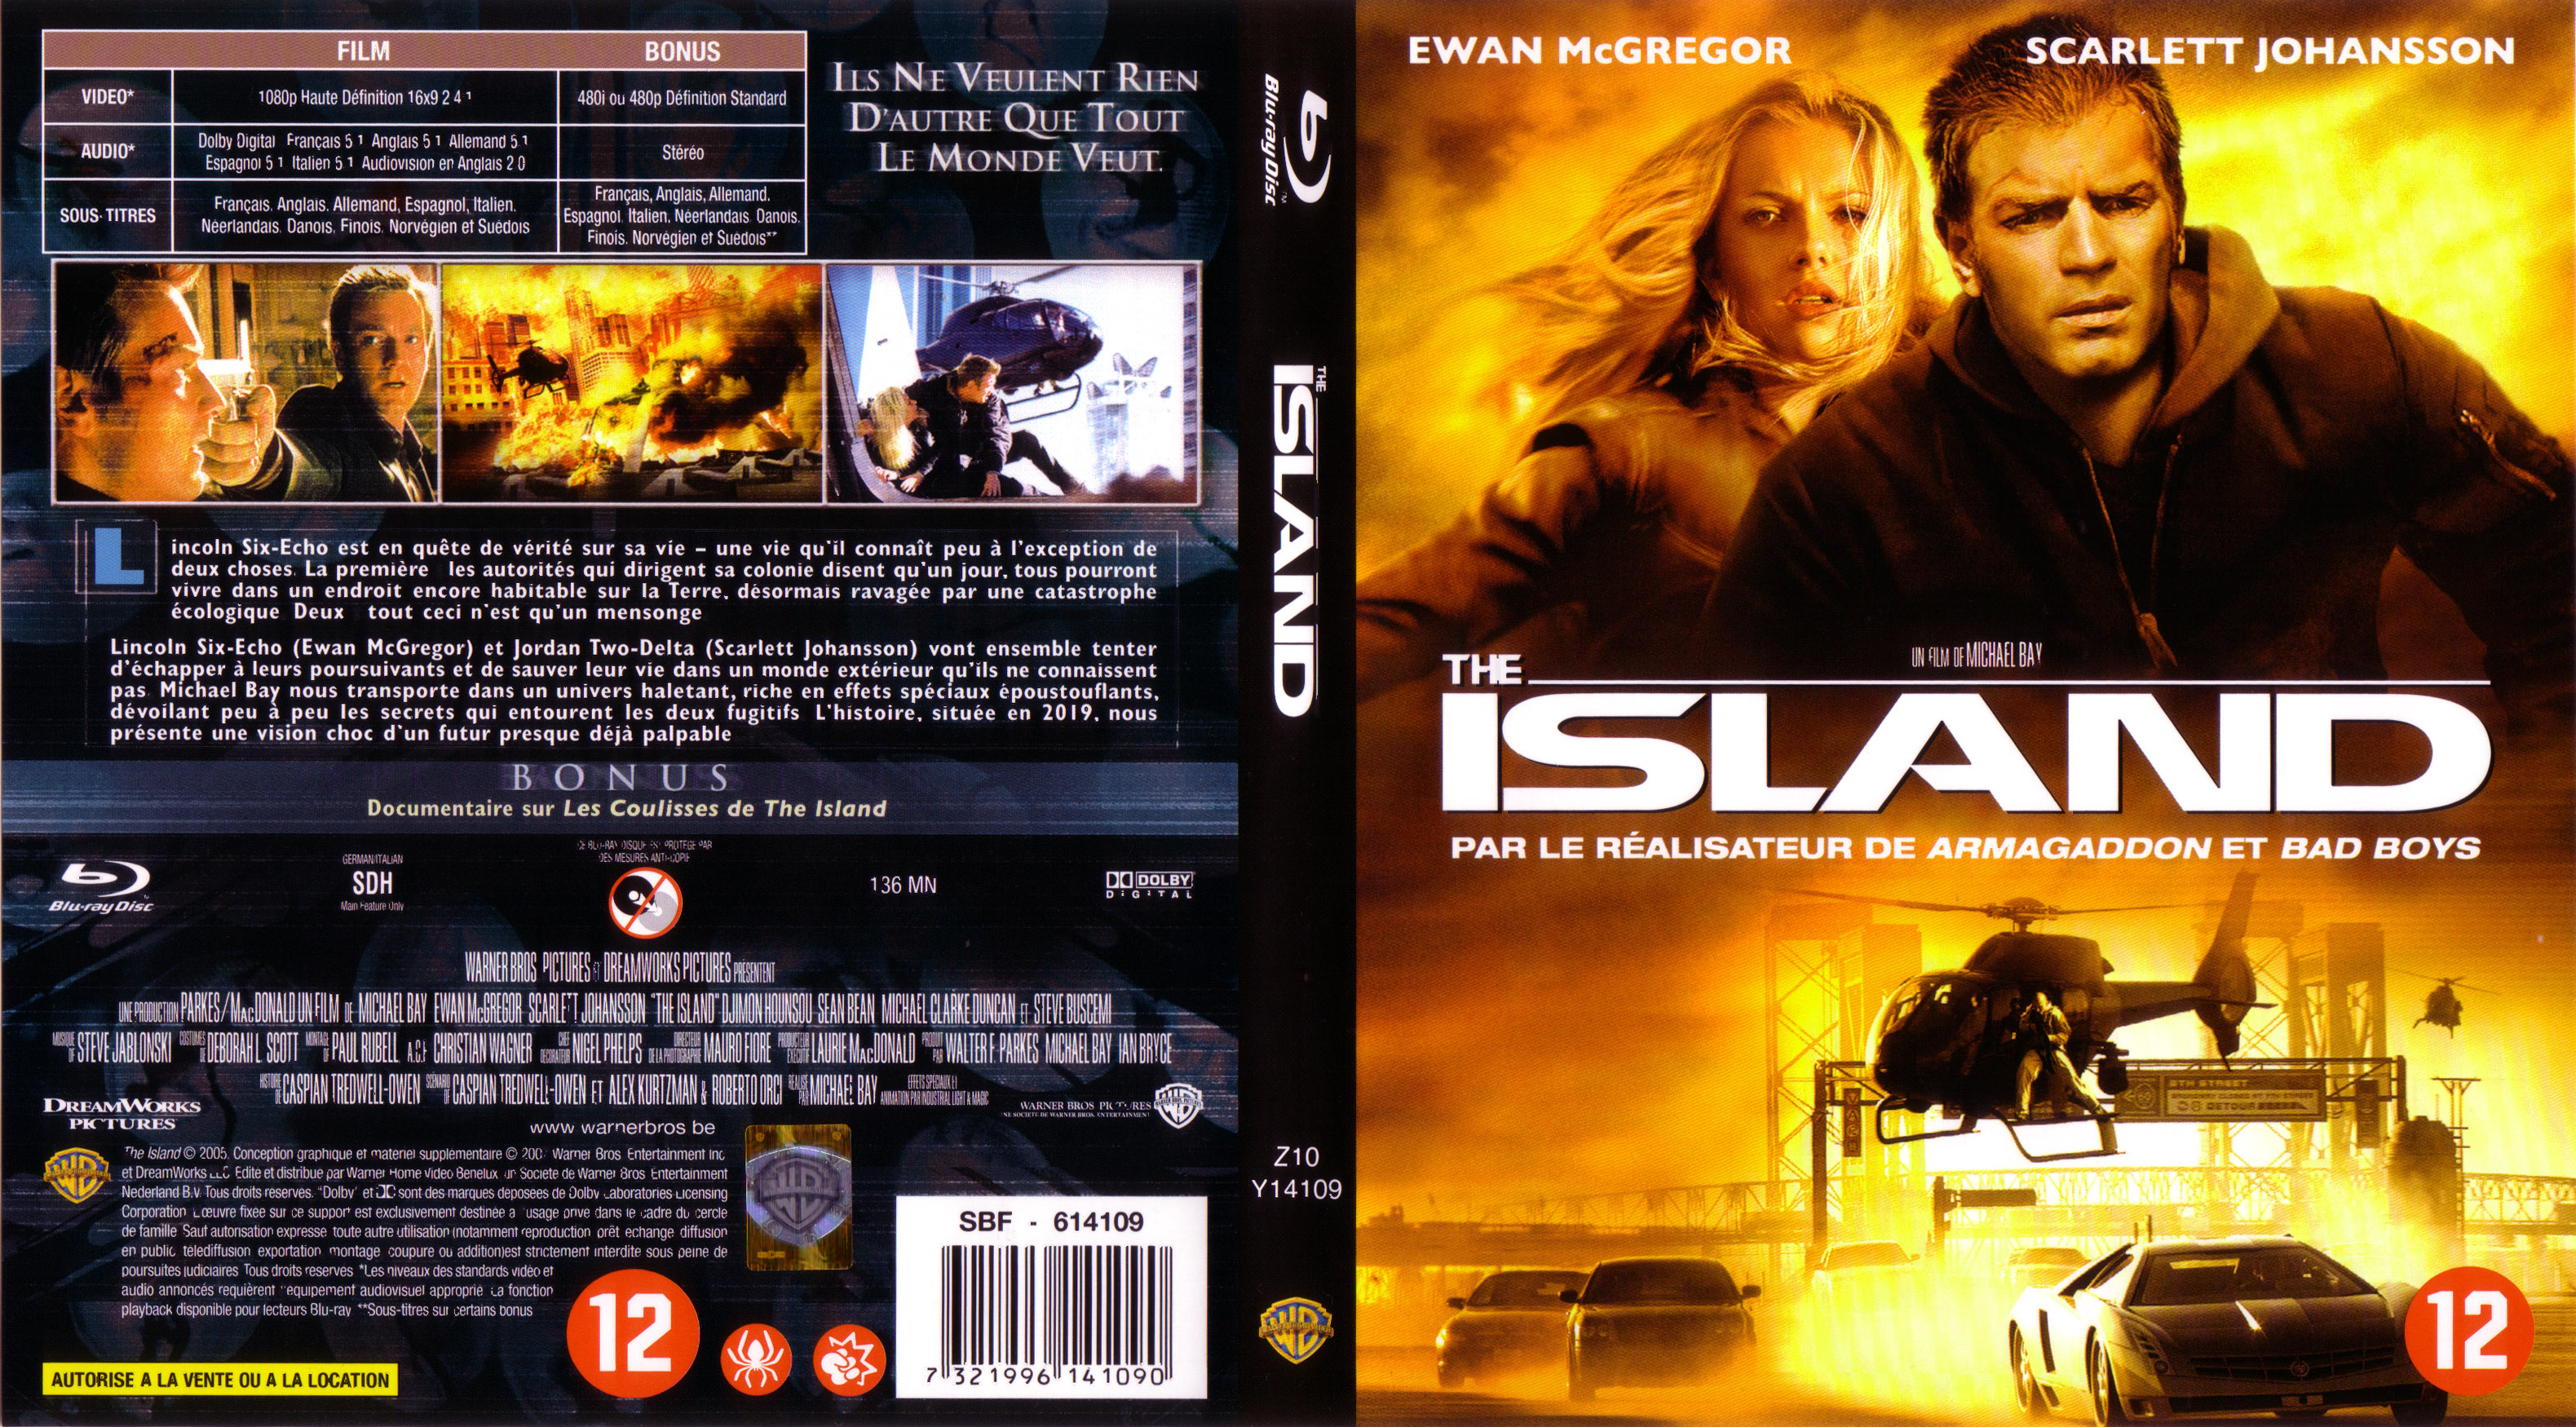 Jaquette DVD The island (BLU-RAY) v2